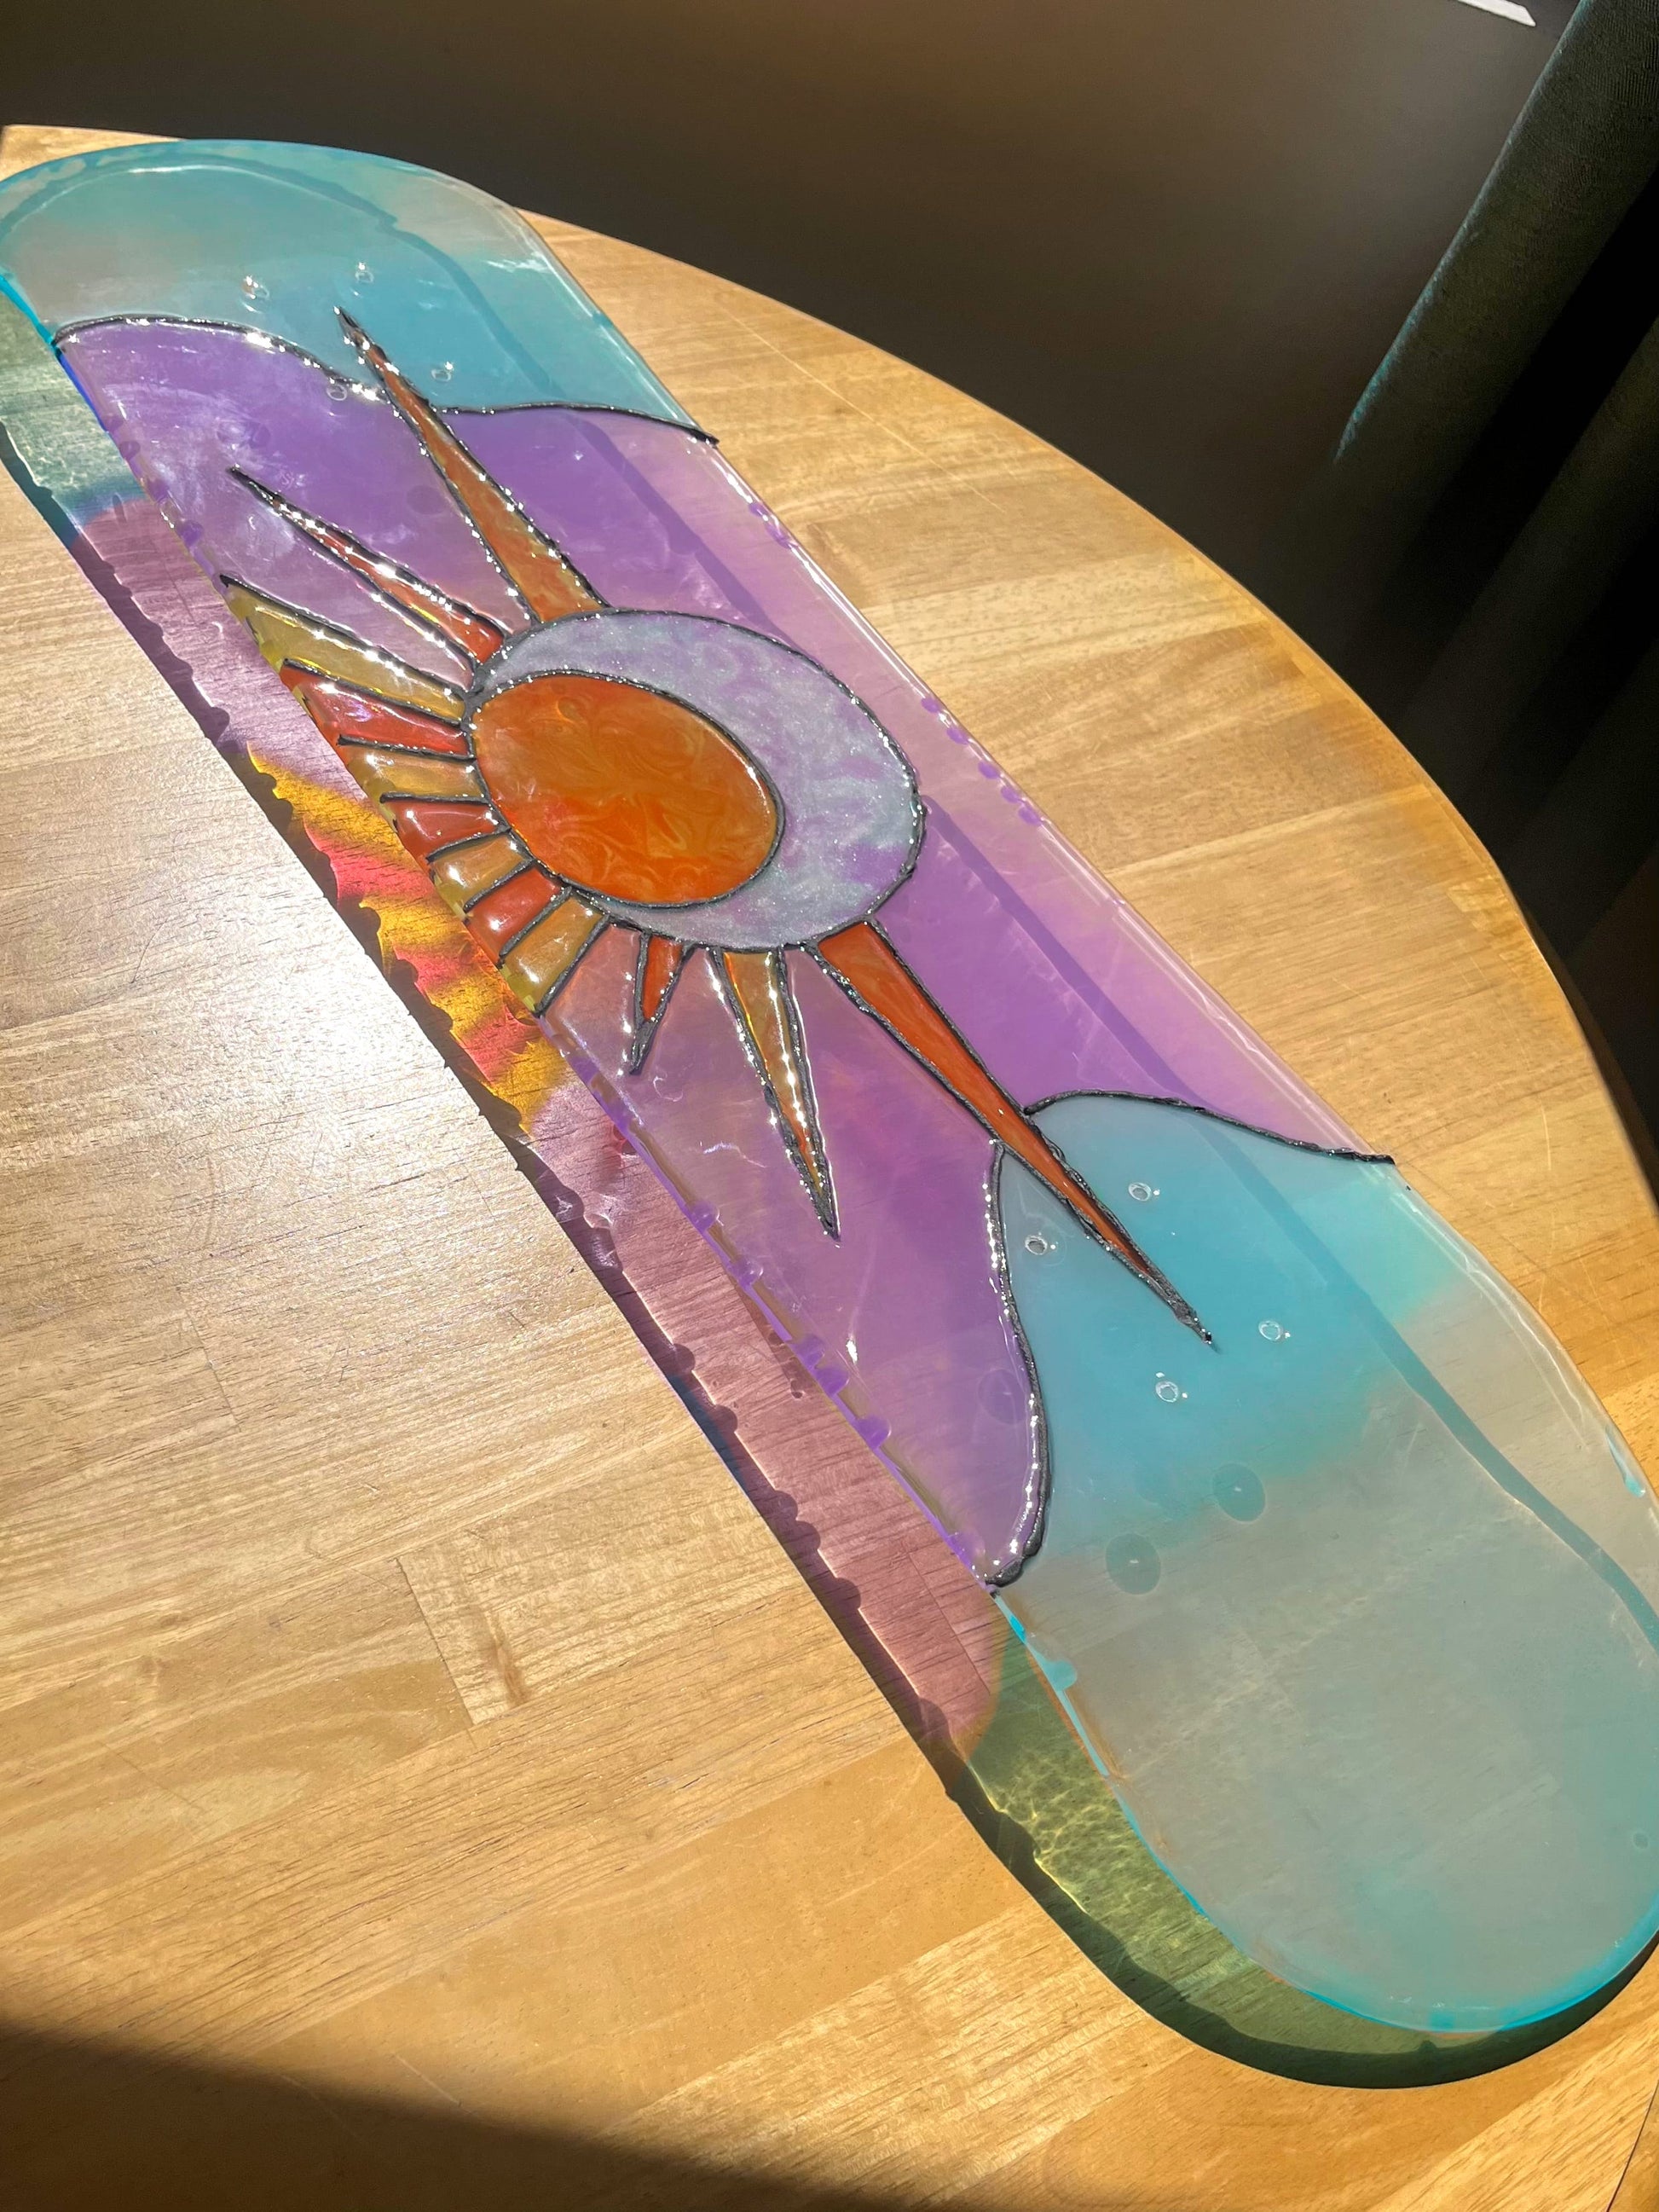 Purple and blue stained glass 'Sun and Moon' skateboard art on wooden table casting colorful shadow.